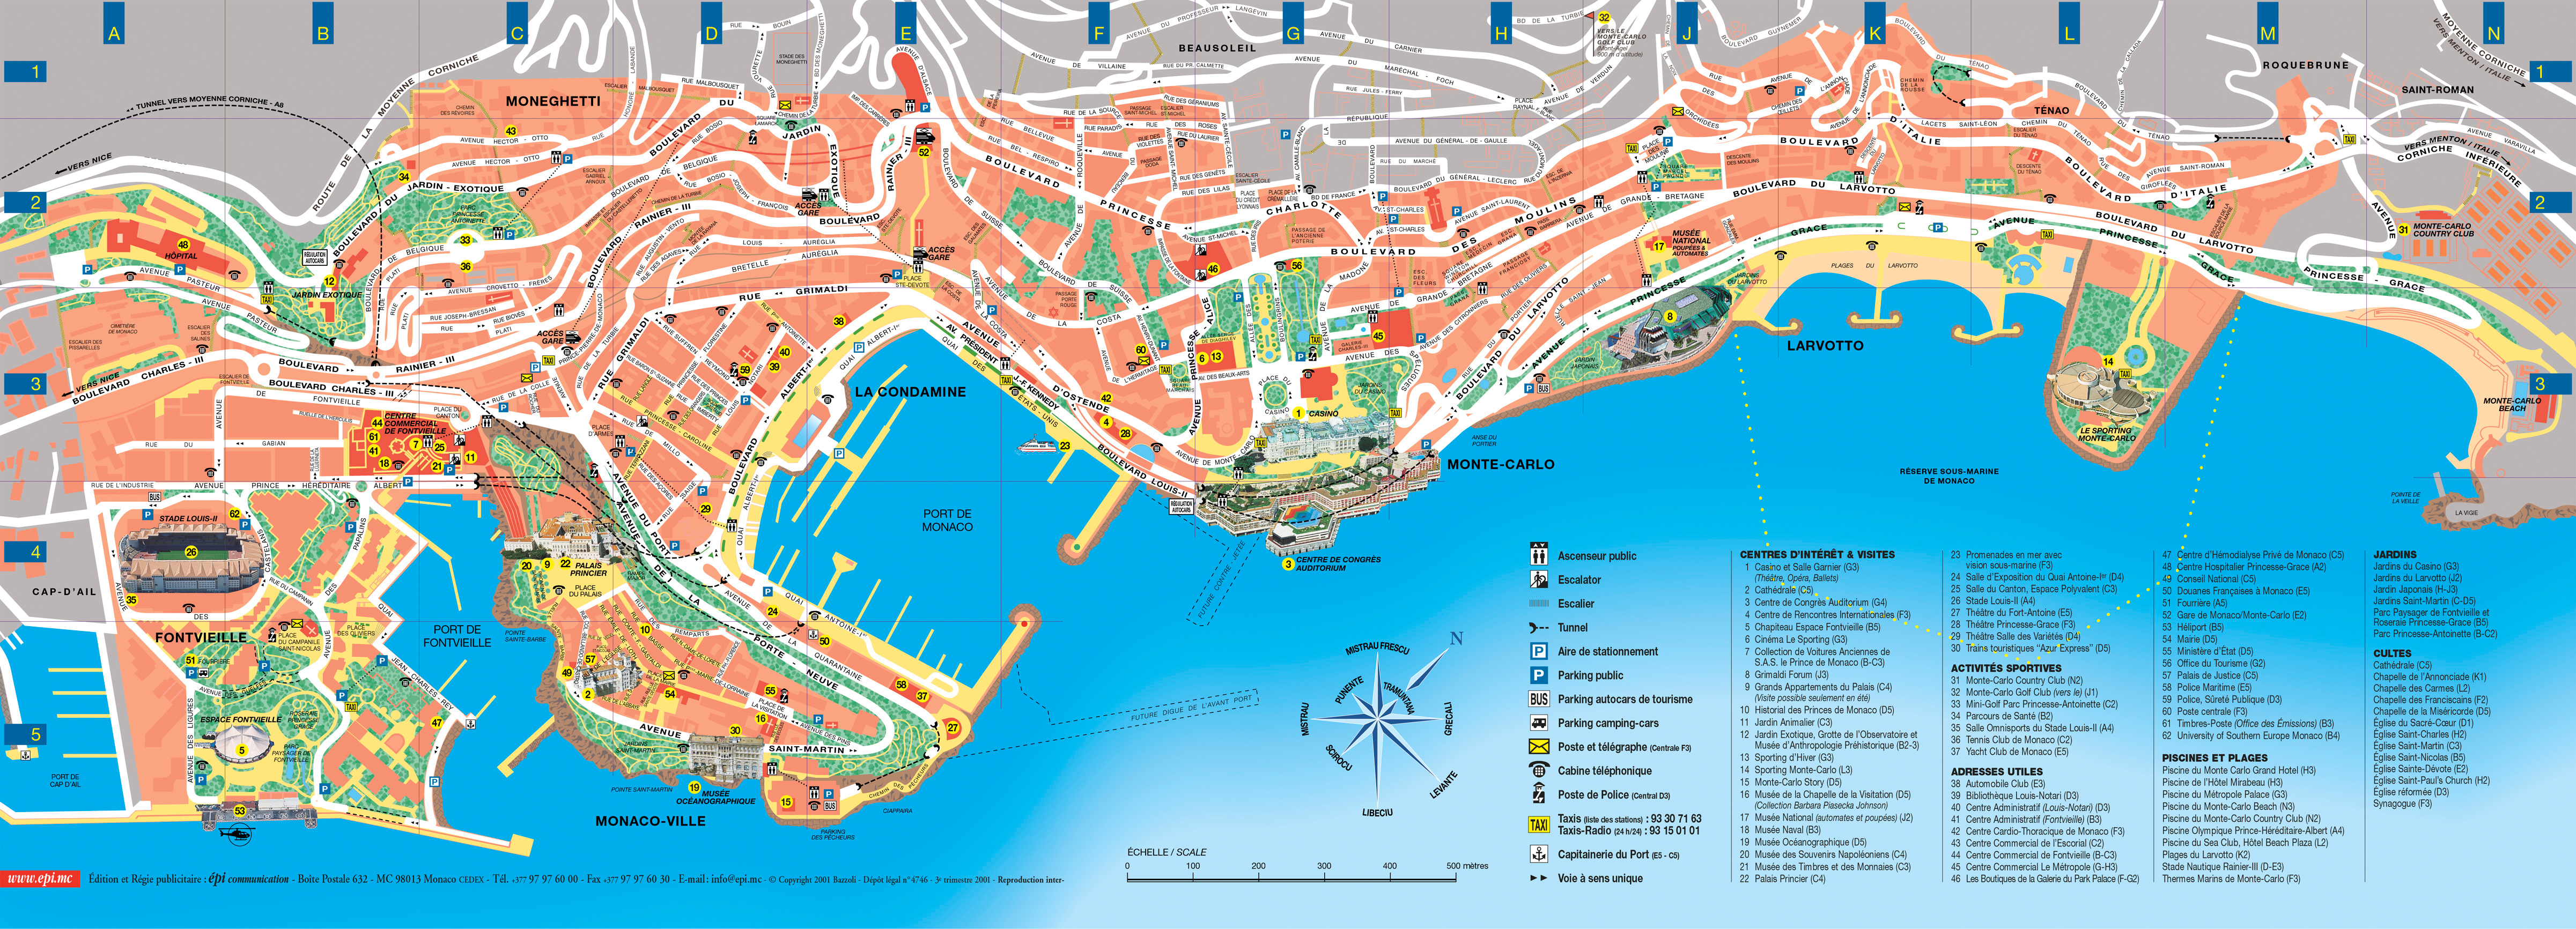 Detailed road and tourist map of Monaco. Monaco detailed road and